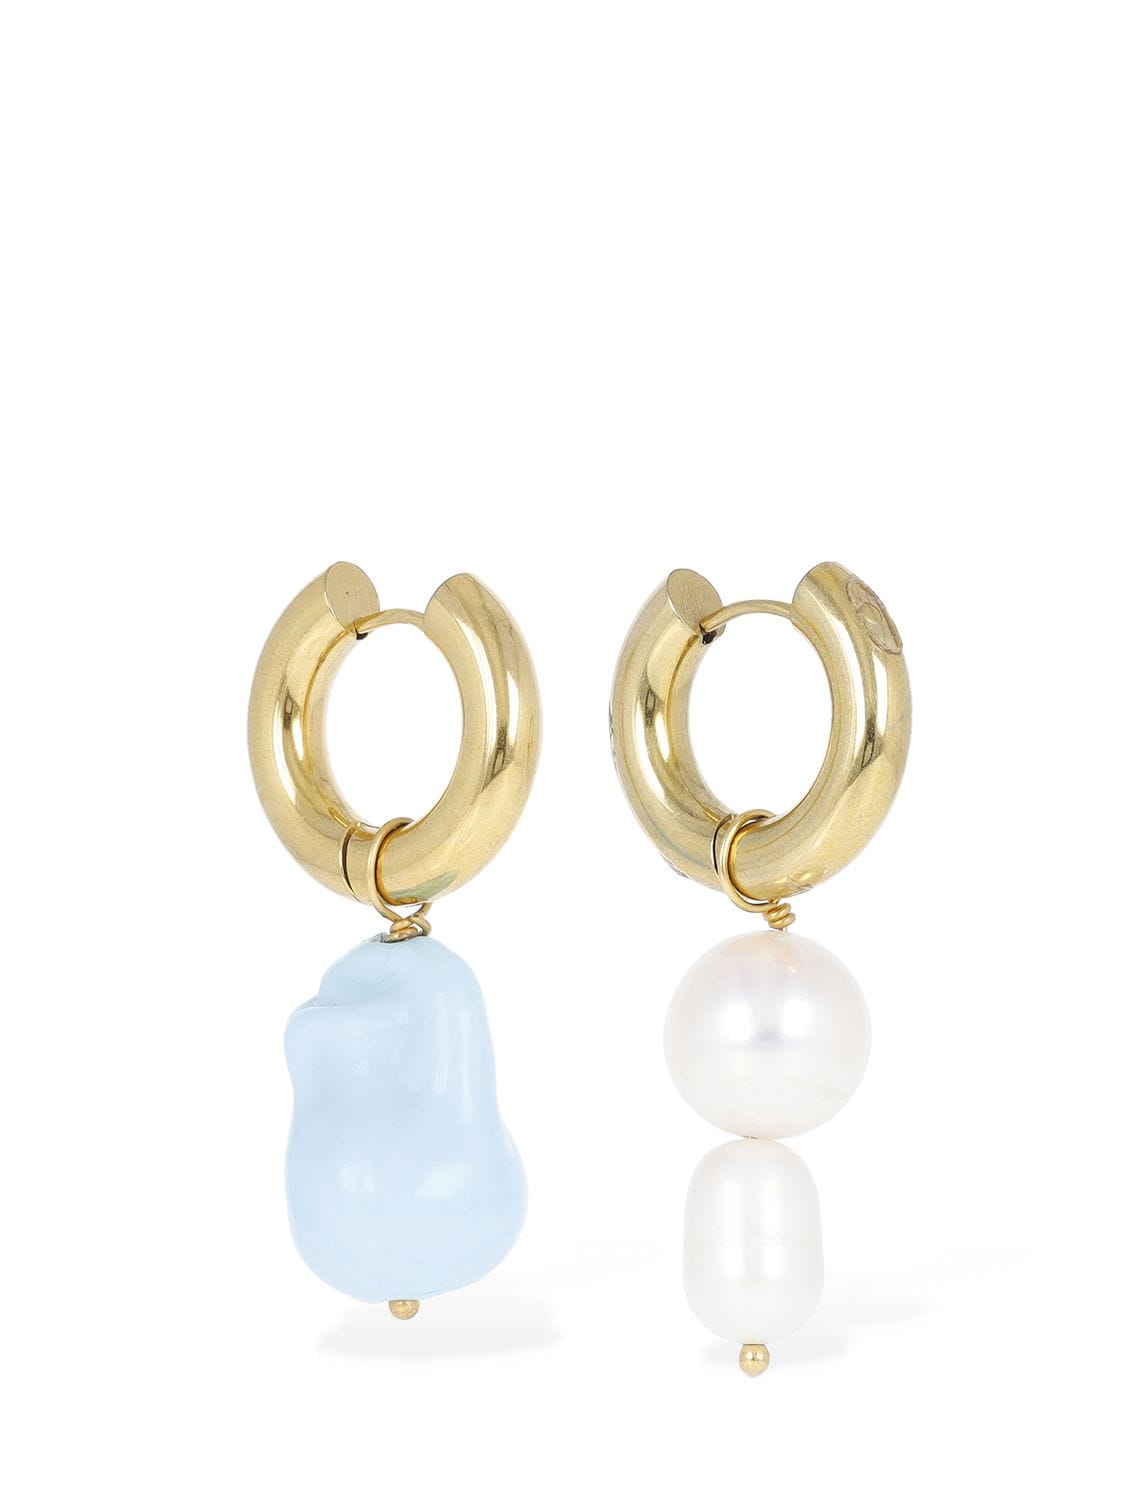 PEARL & TURQUOISE MISMATCHED EARRINGS